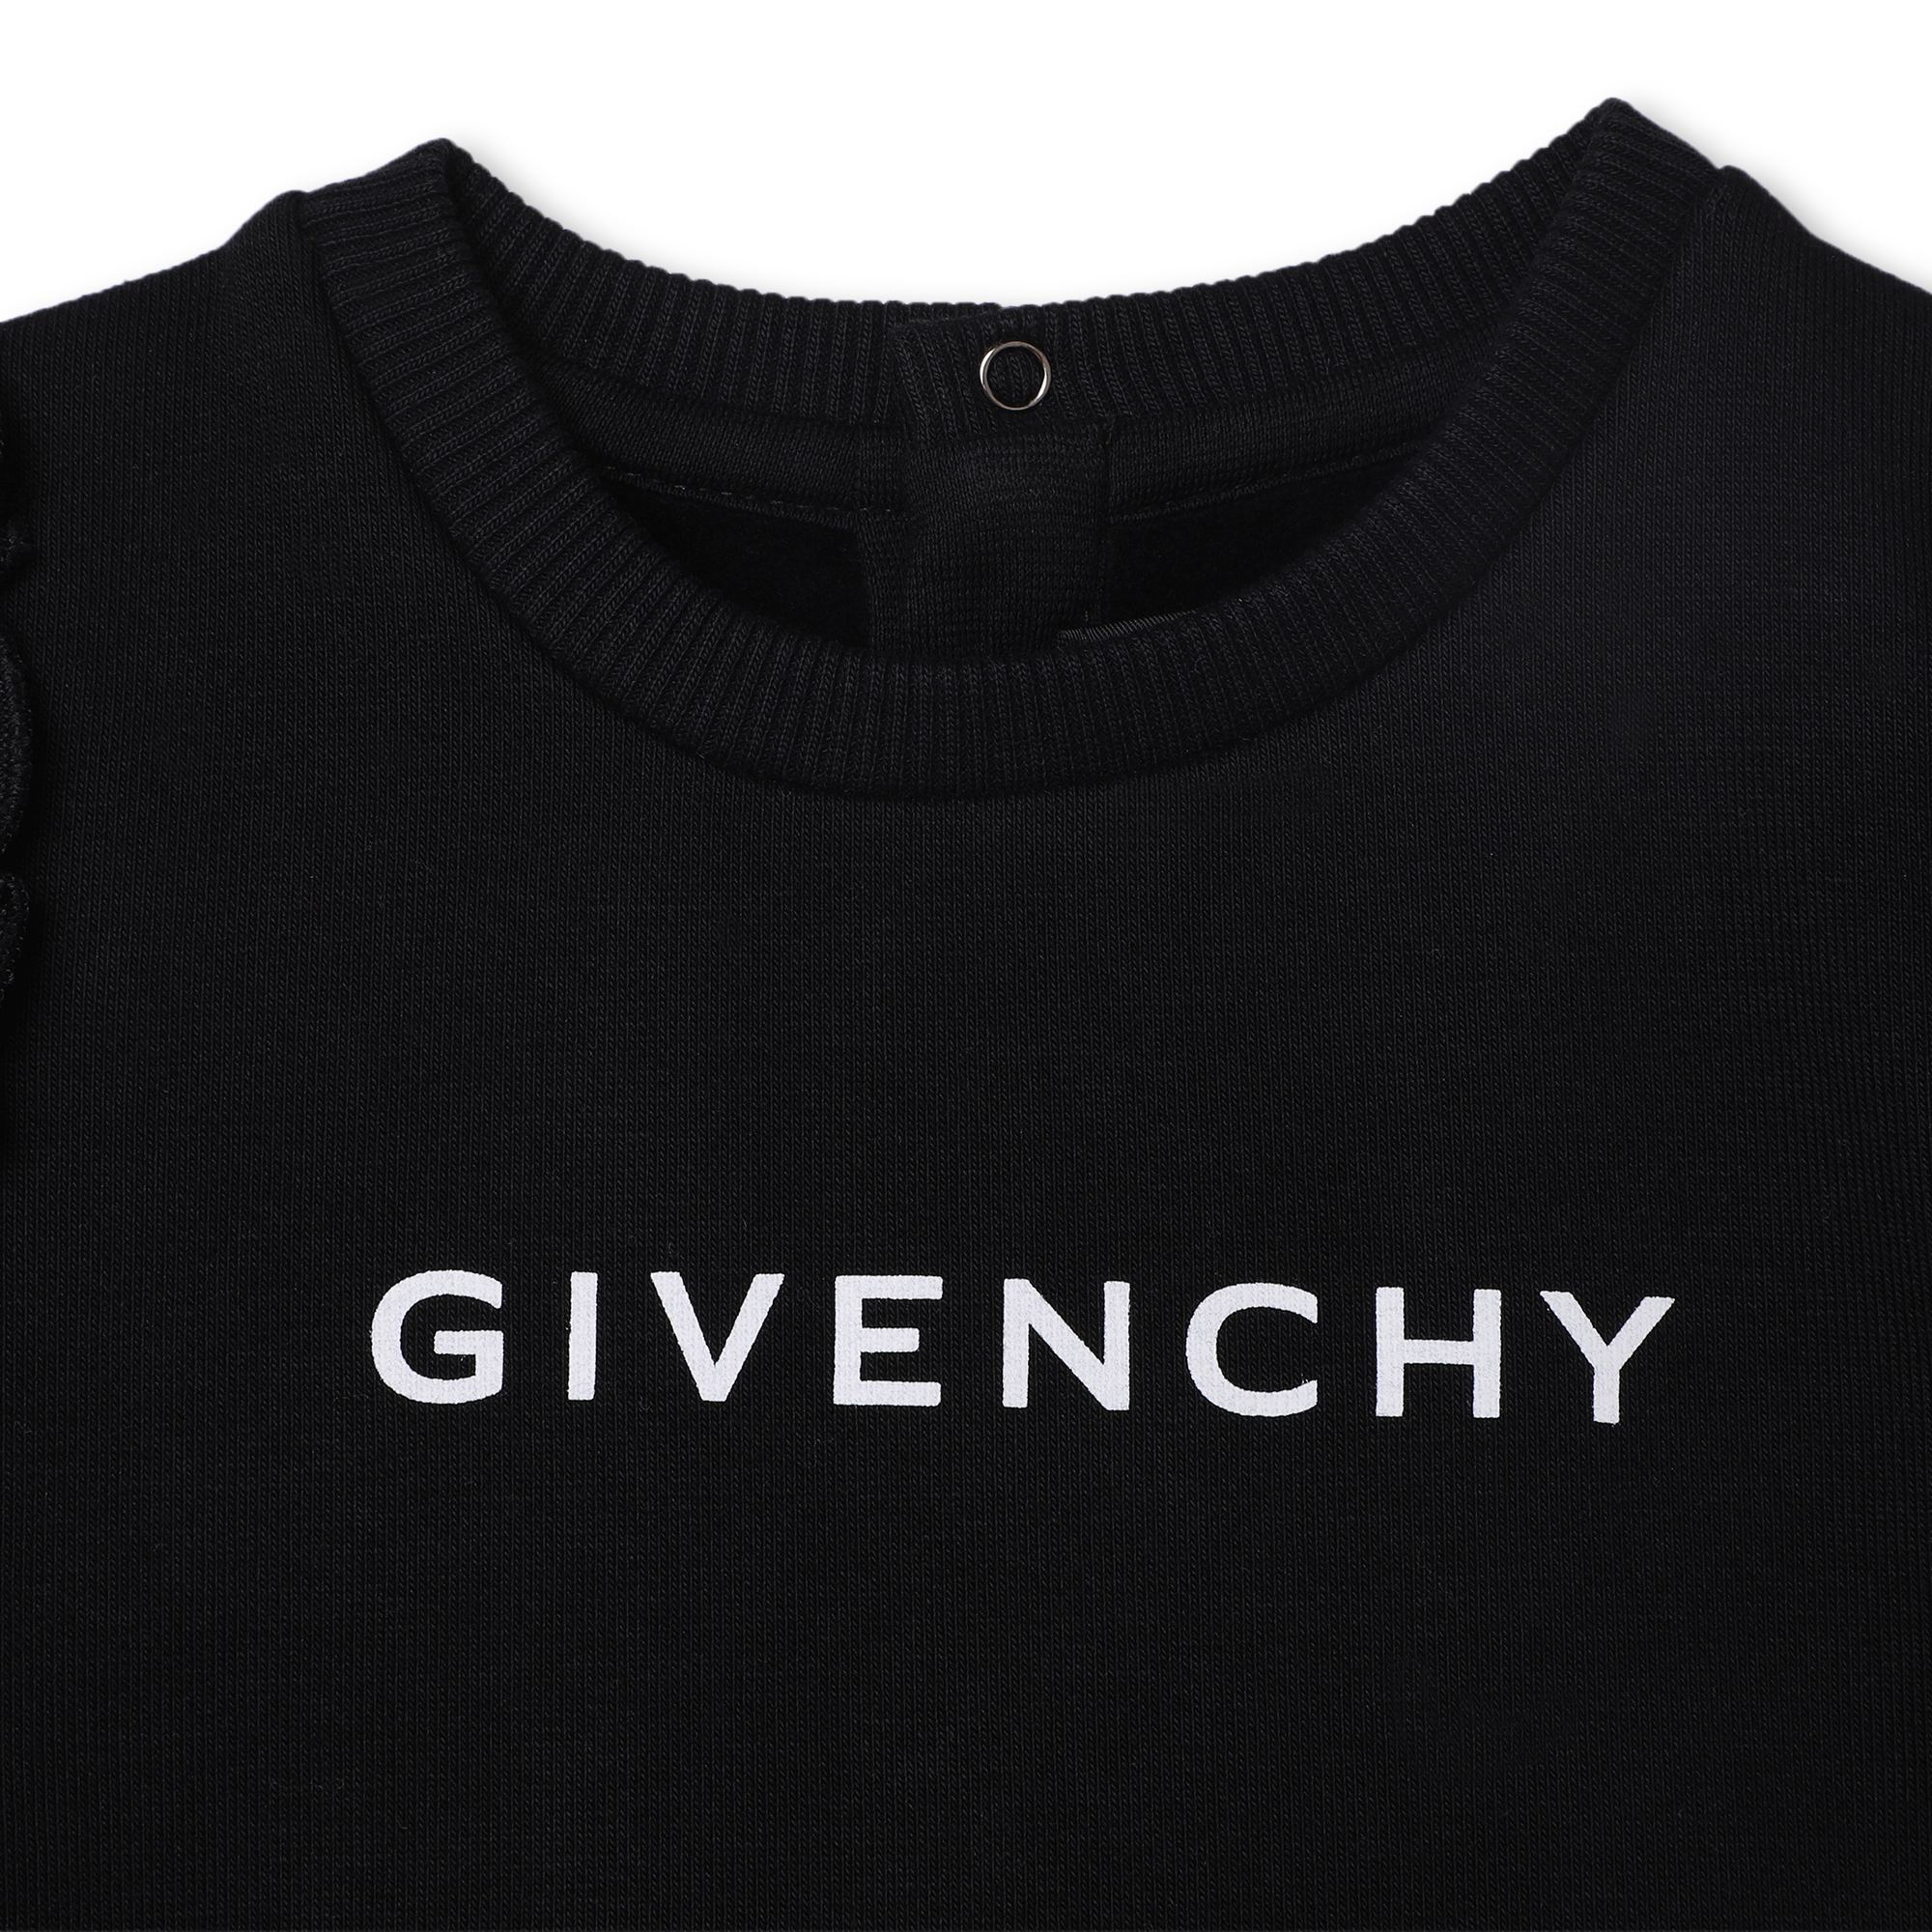 Dress with ruffles GIVENCHY for GIRL